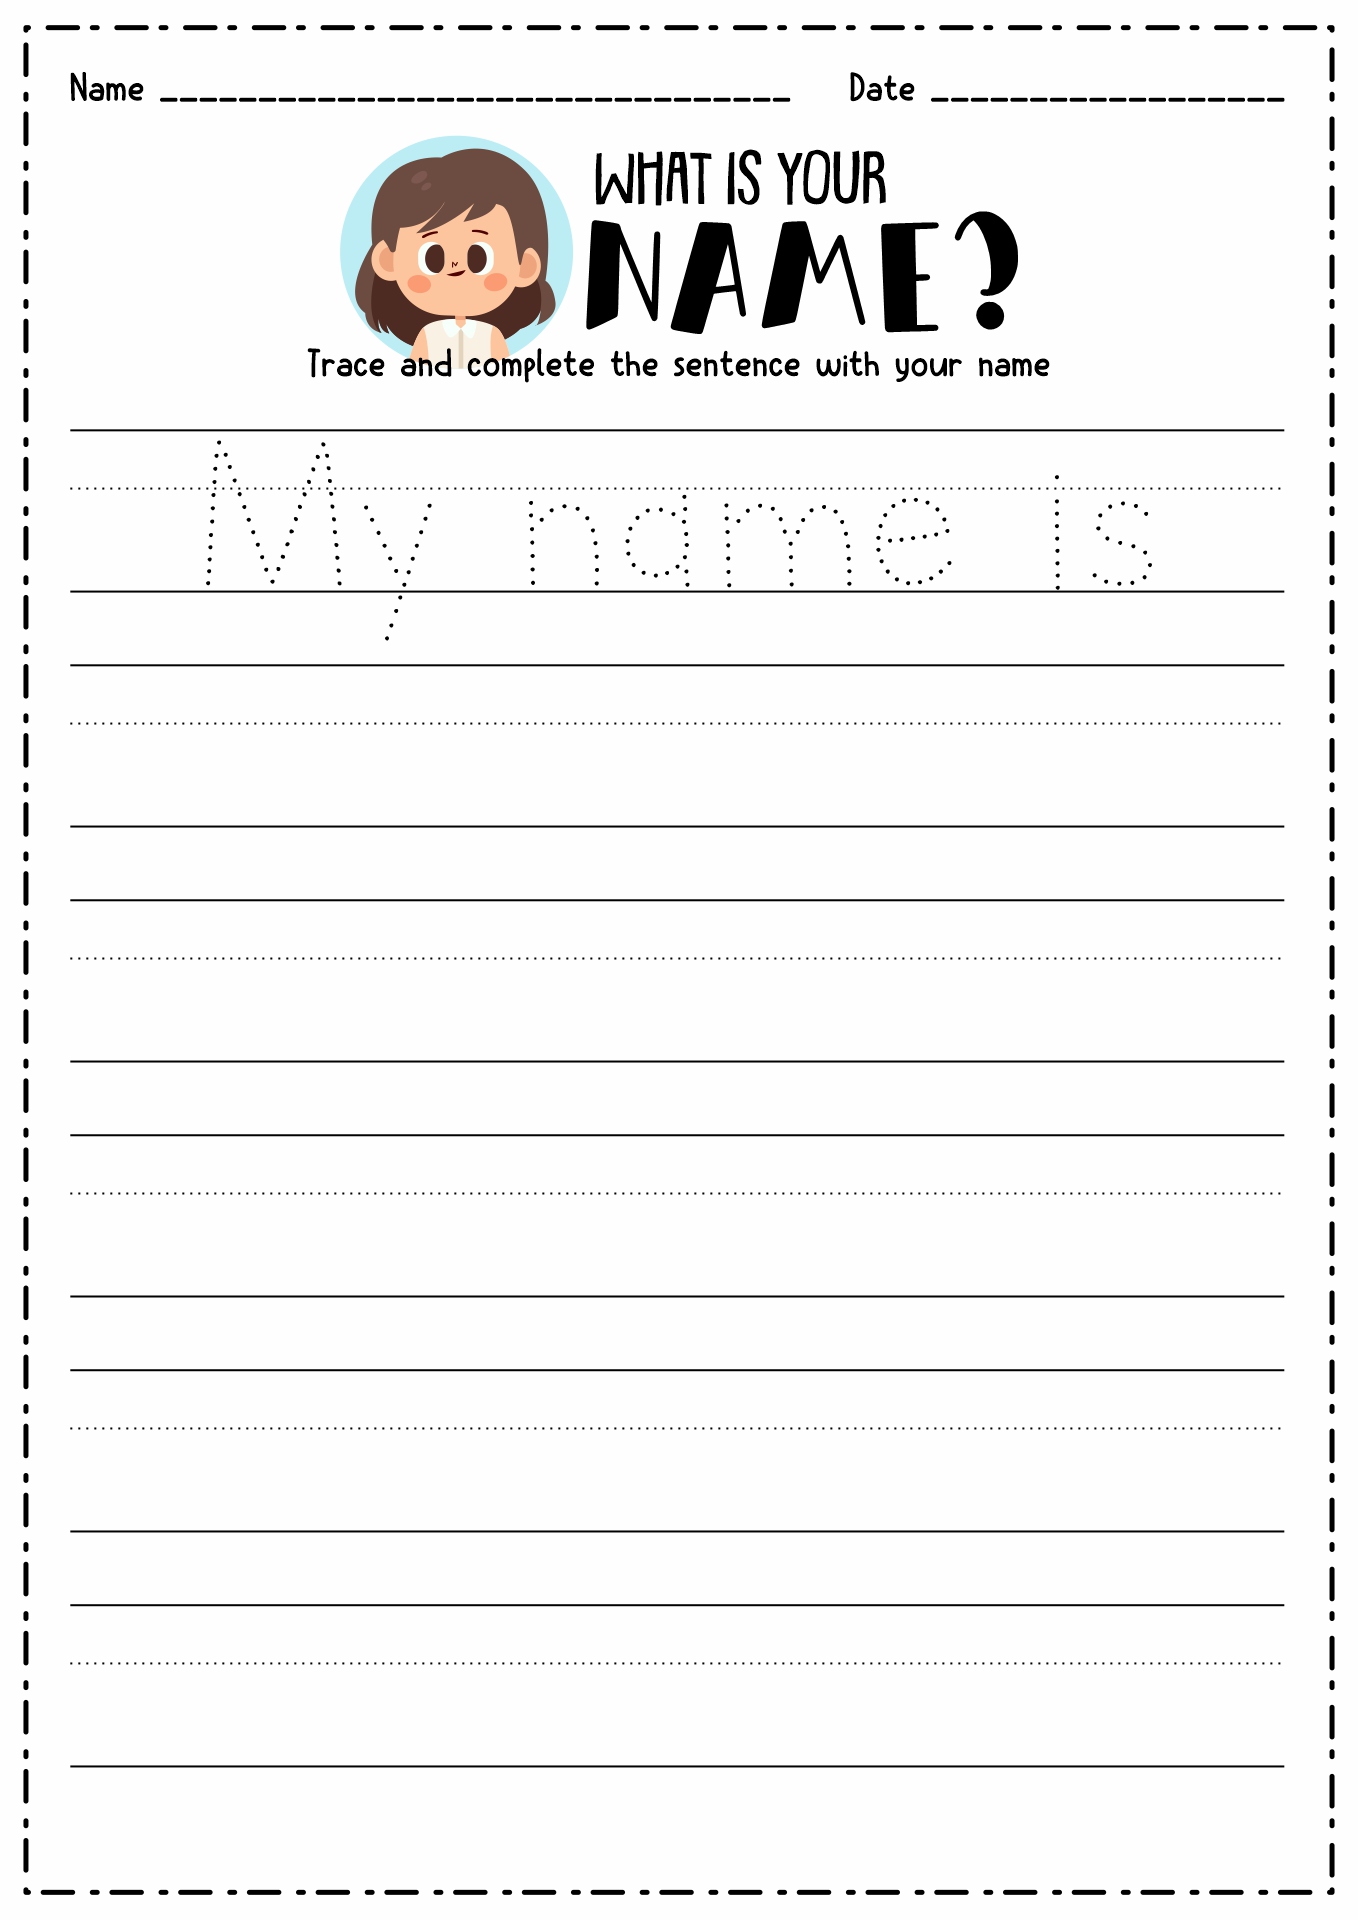 free-printable-trace-your-name-worksheets-printable-templates